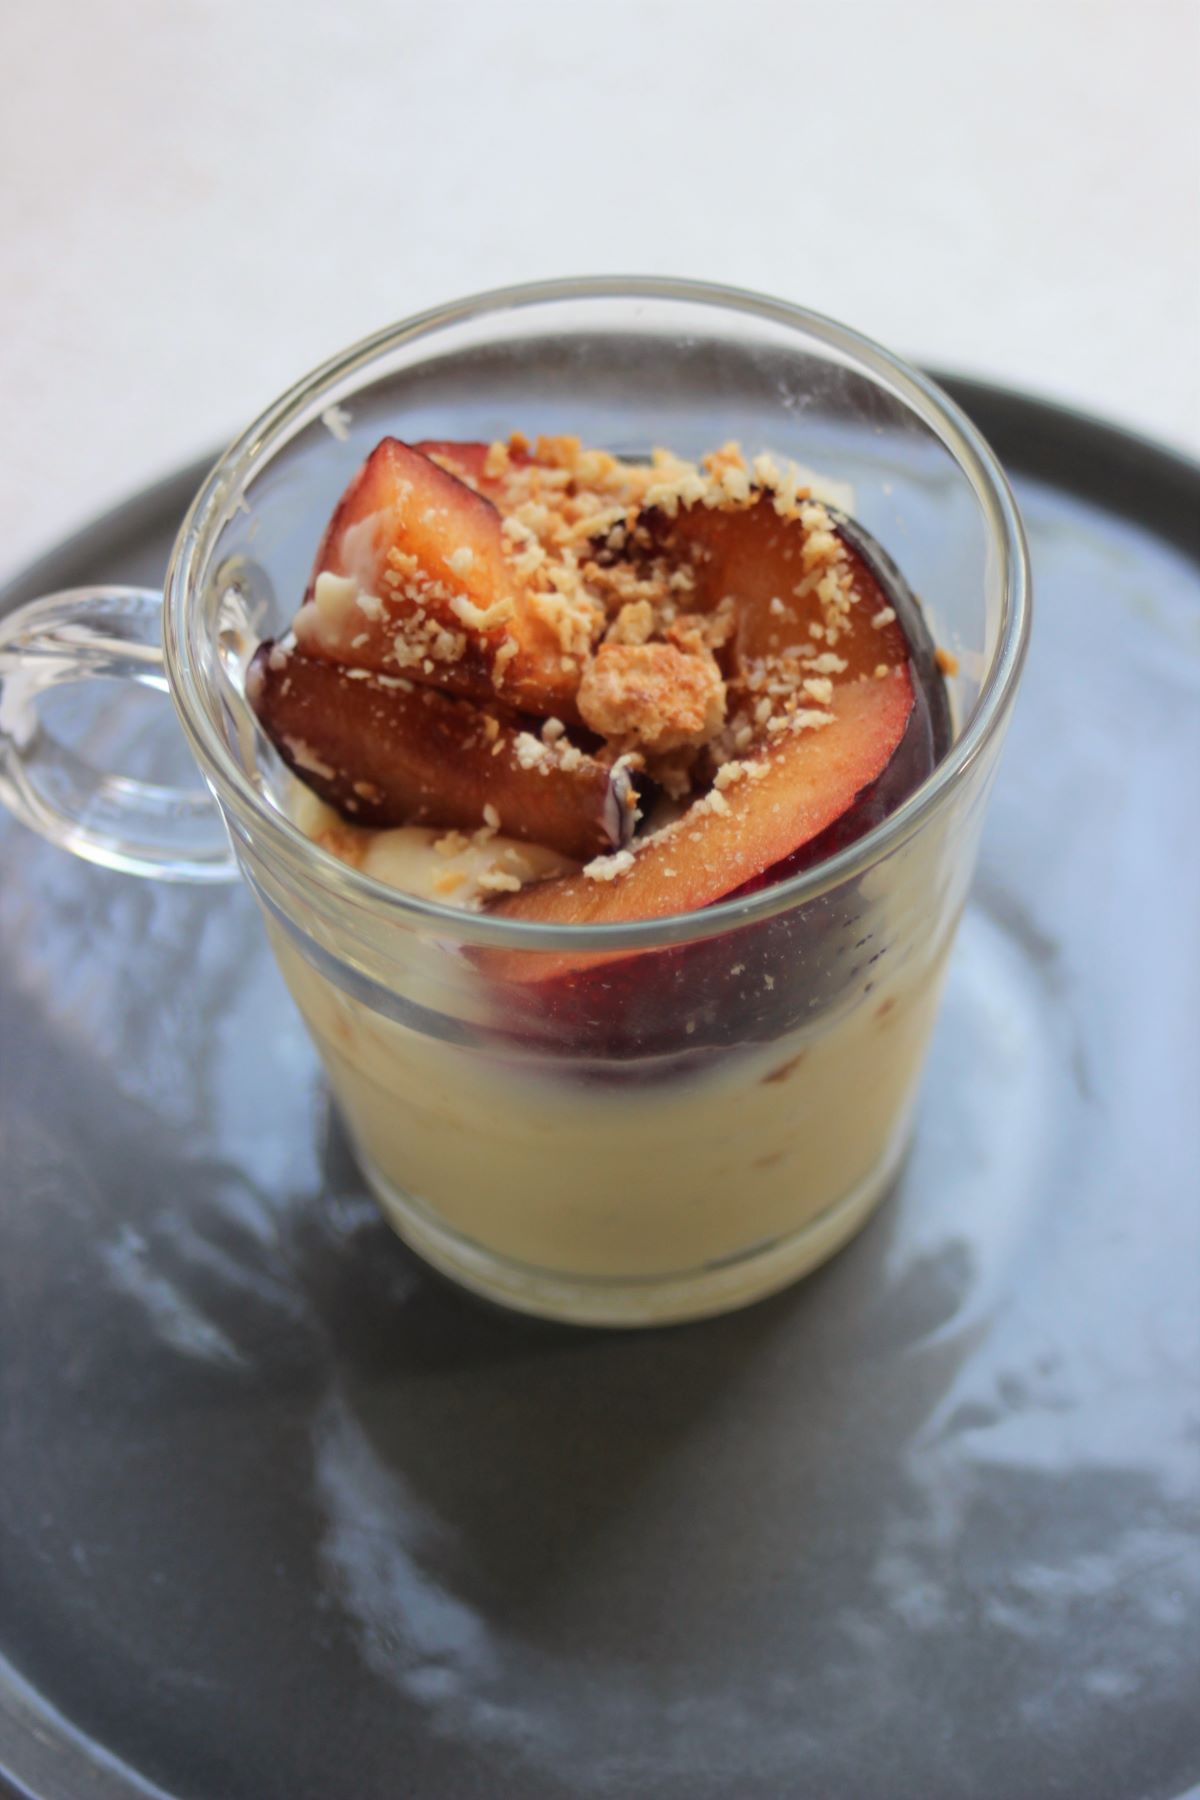 A glass cup with cream (panna cotta), plum slices, and crumbs.